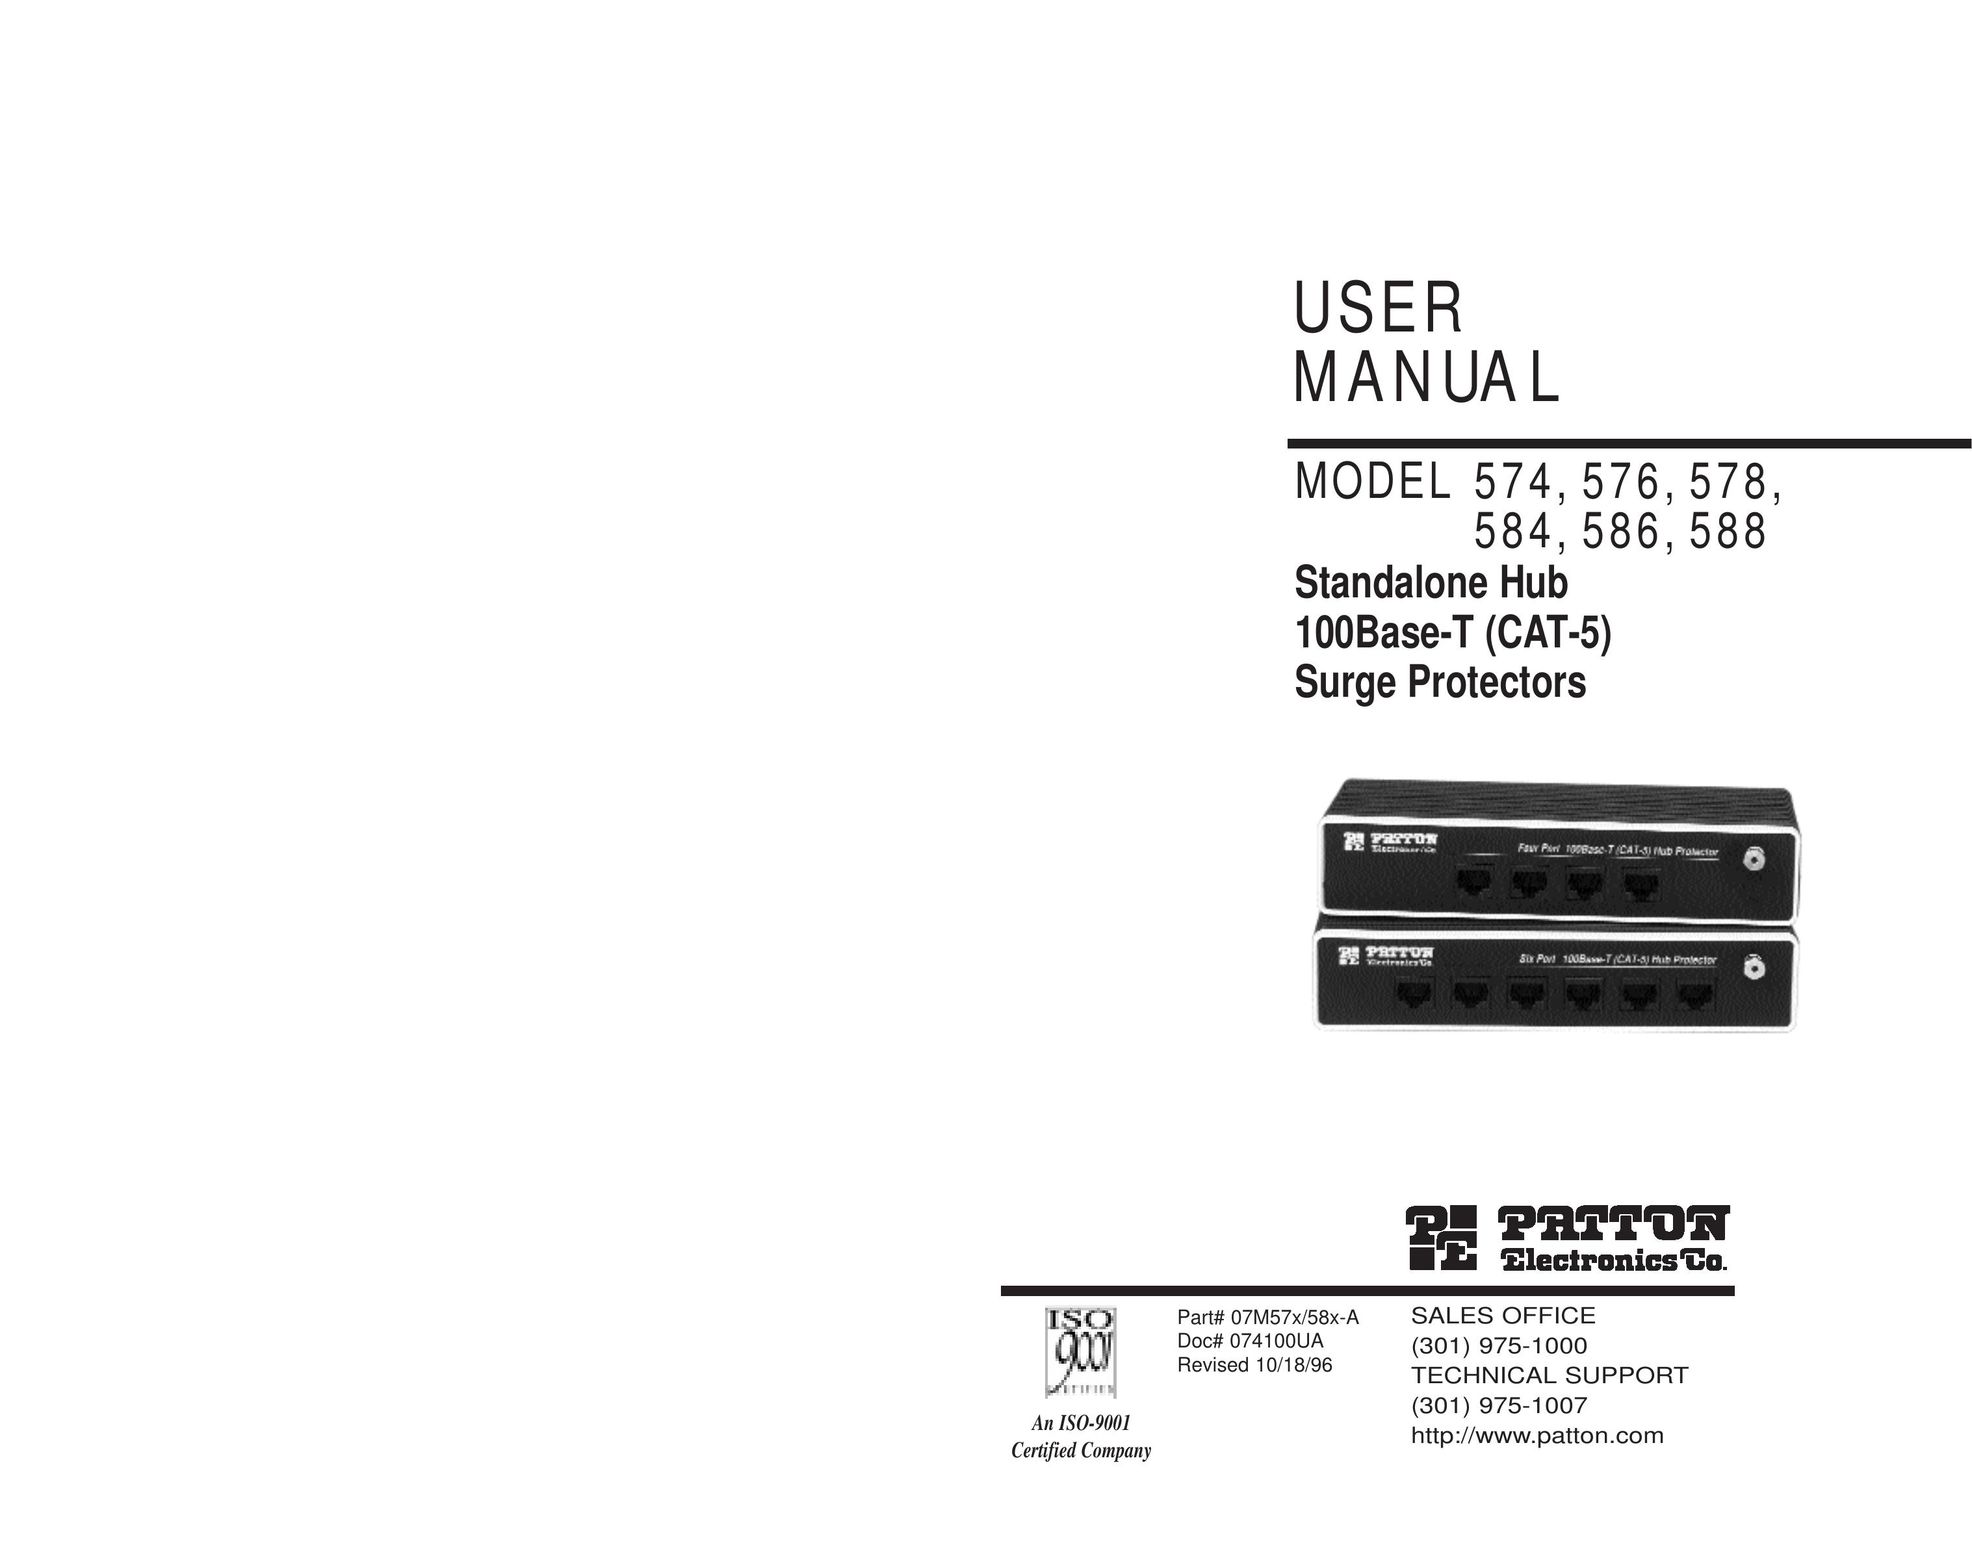 Patton electronic 588 Surge Protector User Manual